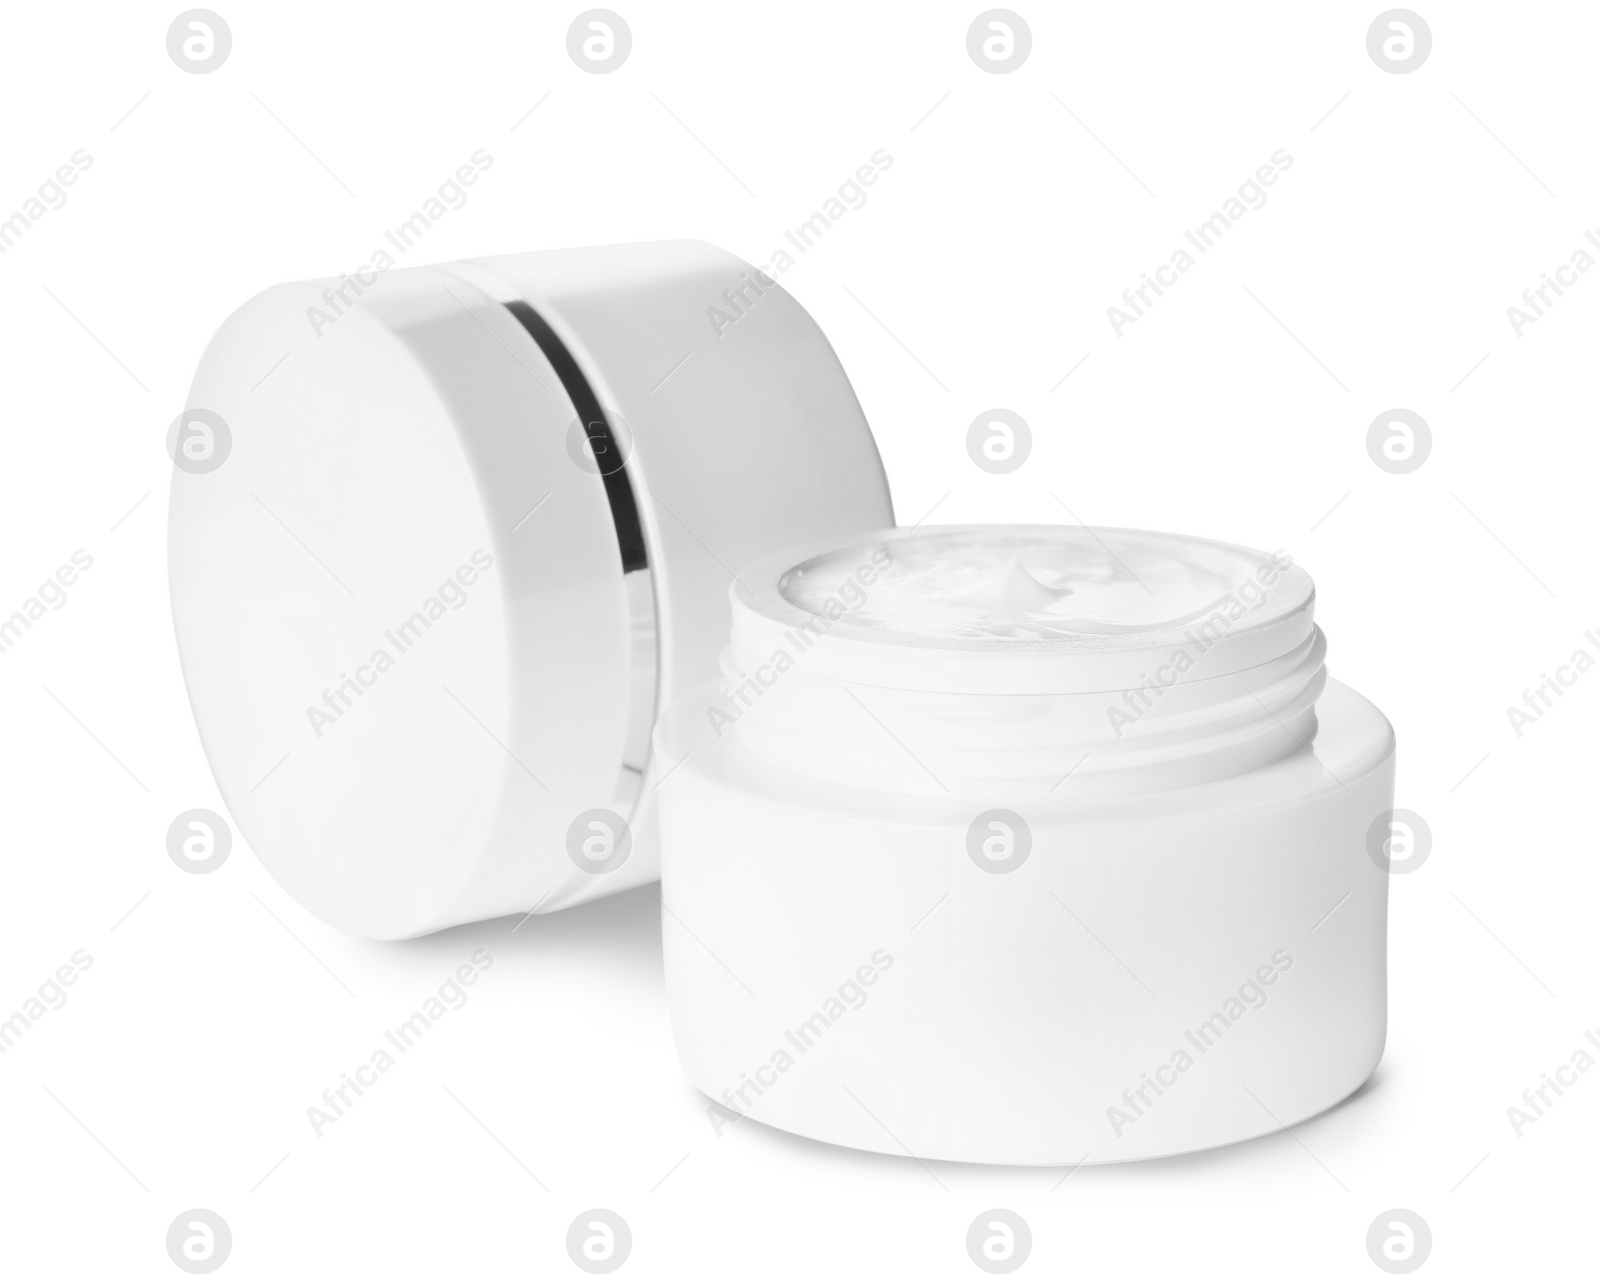 Photo of Jars of luxury face creams isolated on white